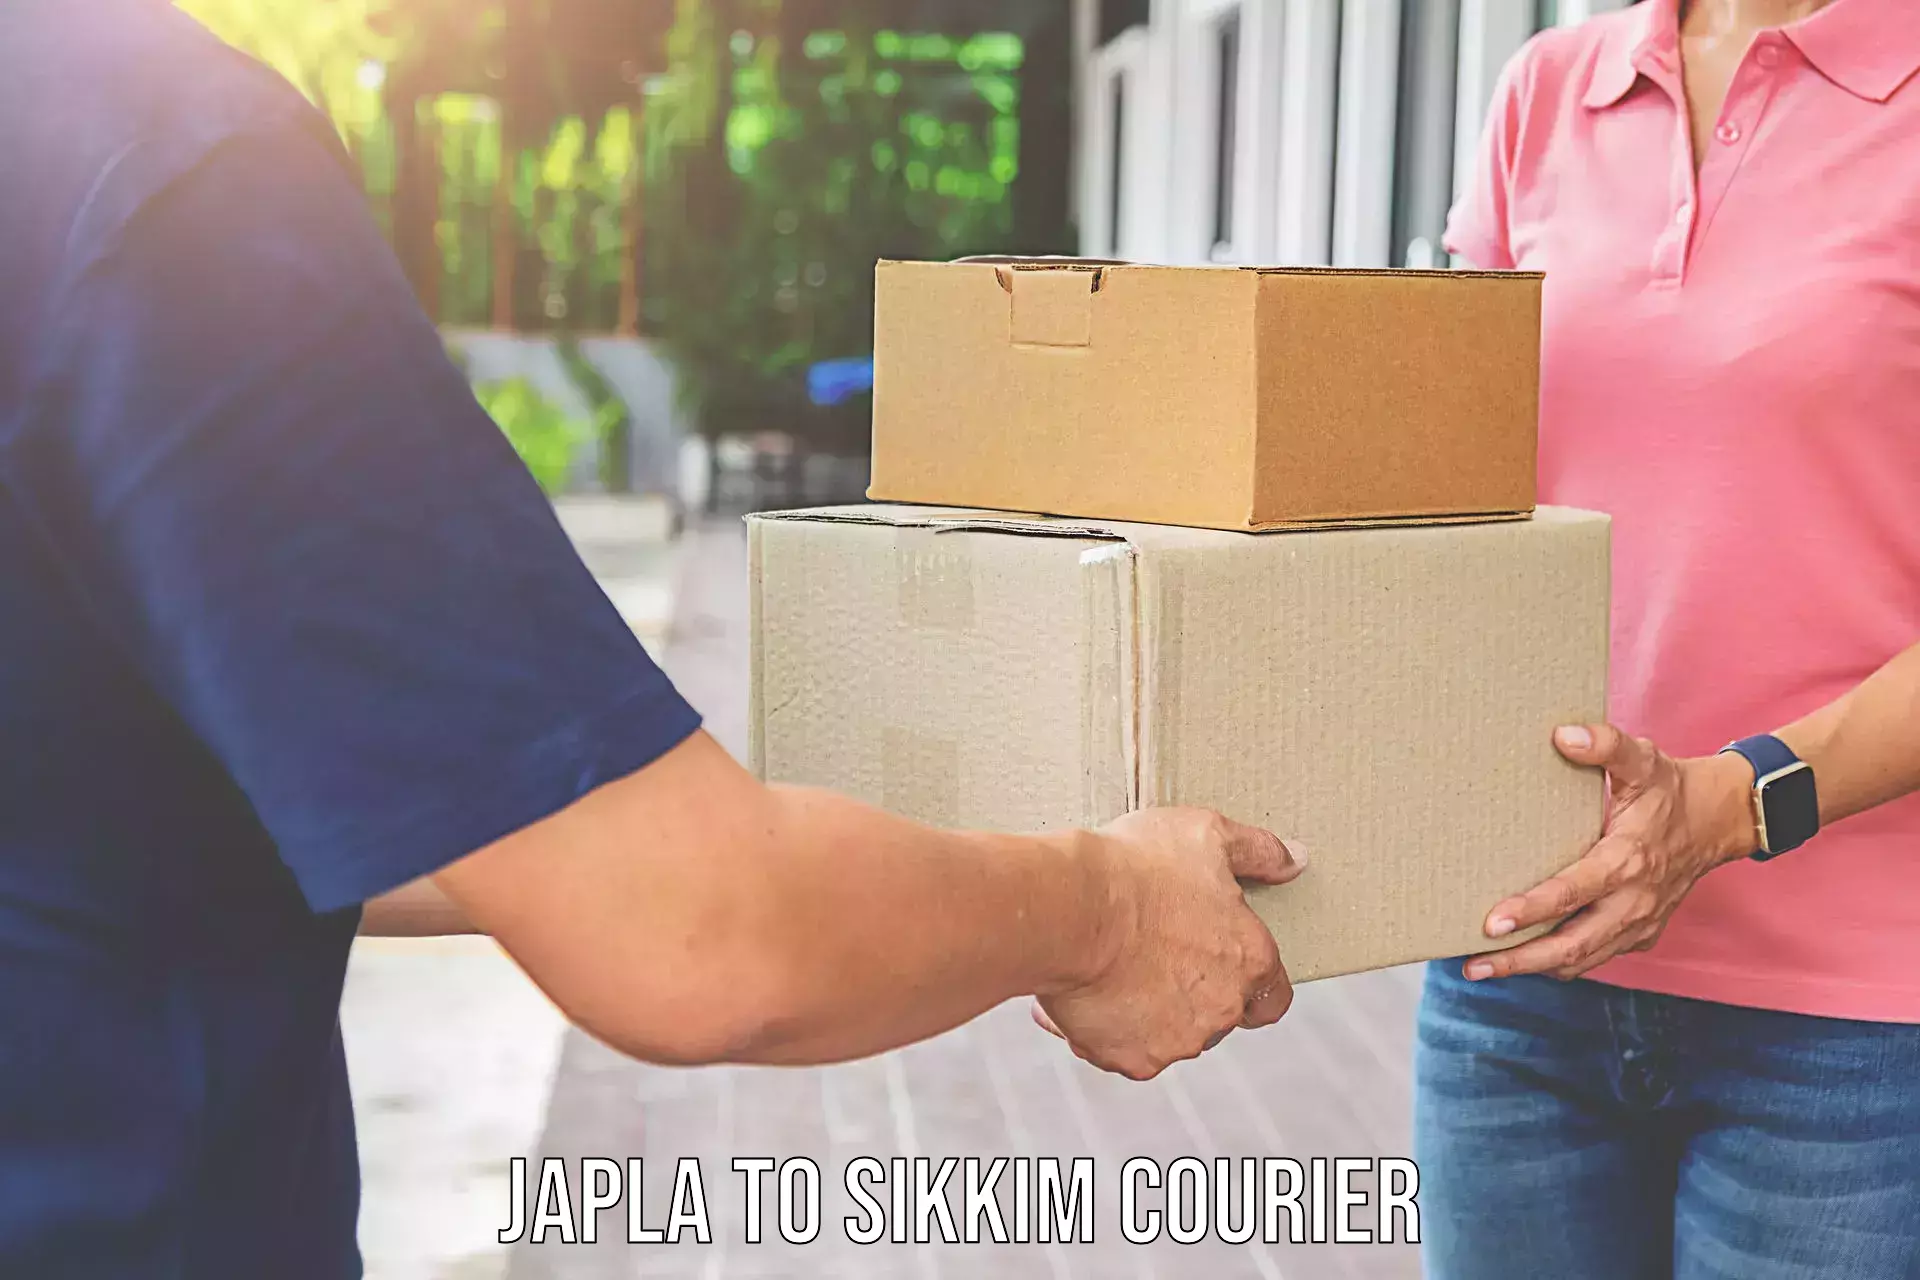 Quality moving company Japla to Pelling